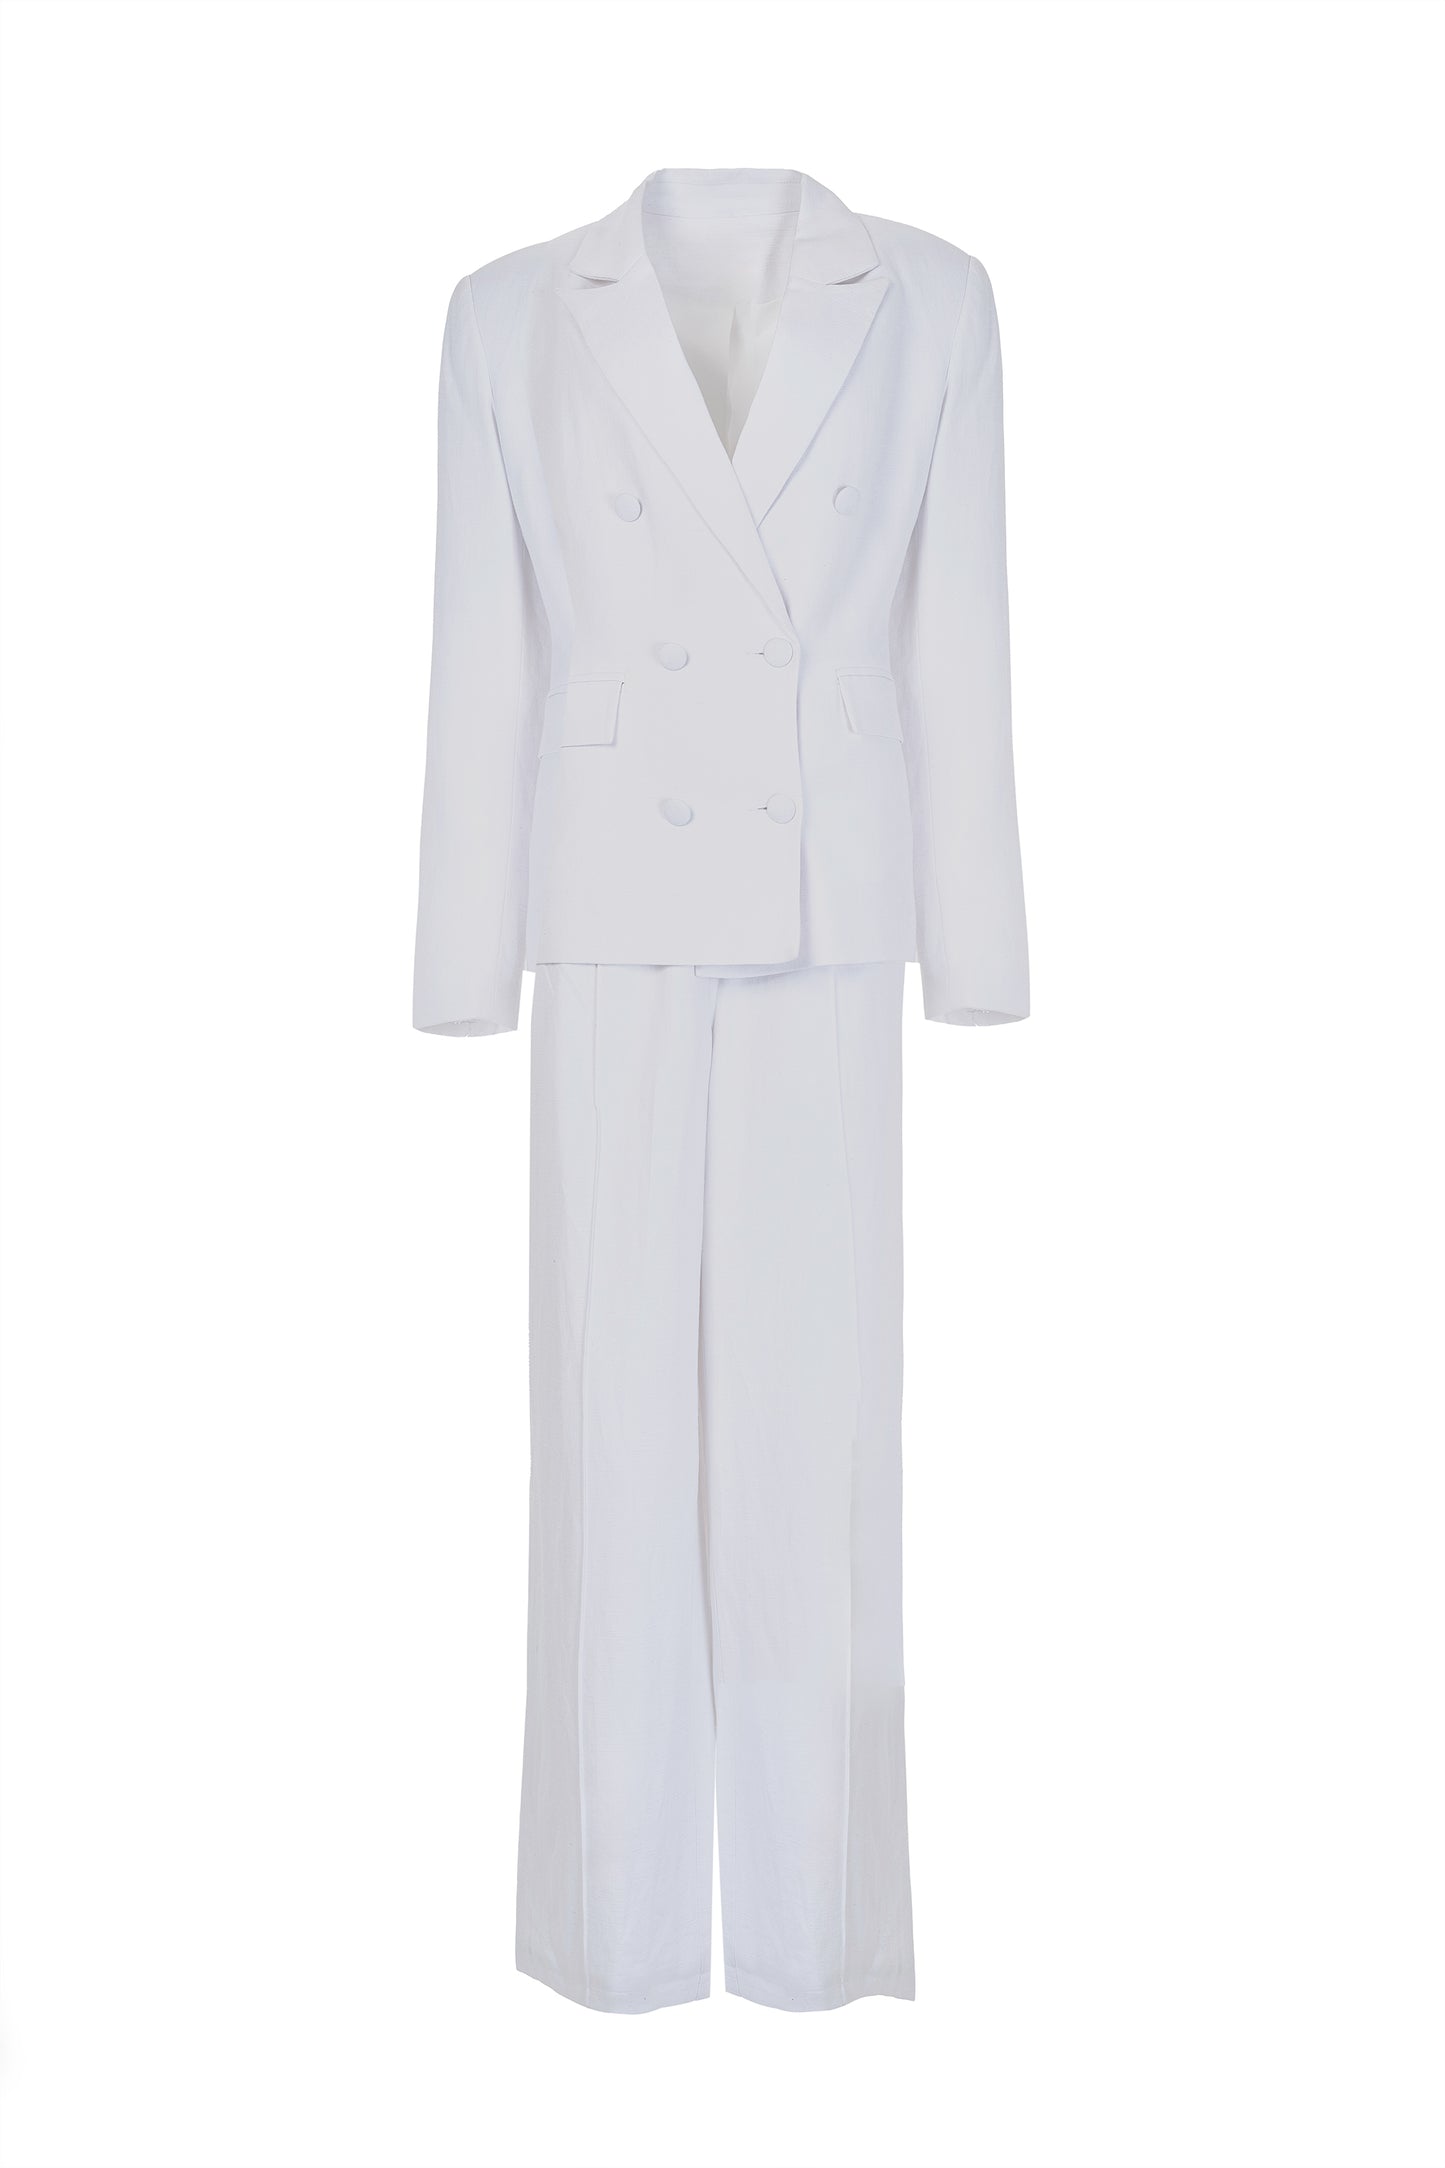 Knit White Blazer Style and Pant Suit